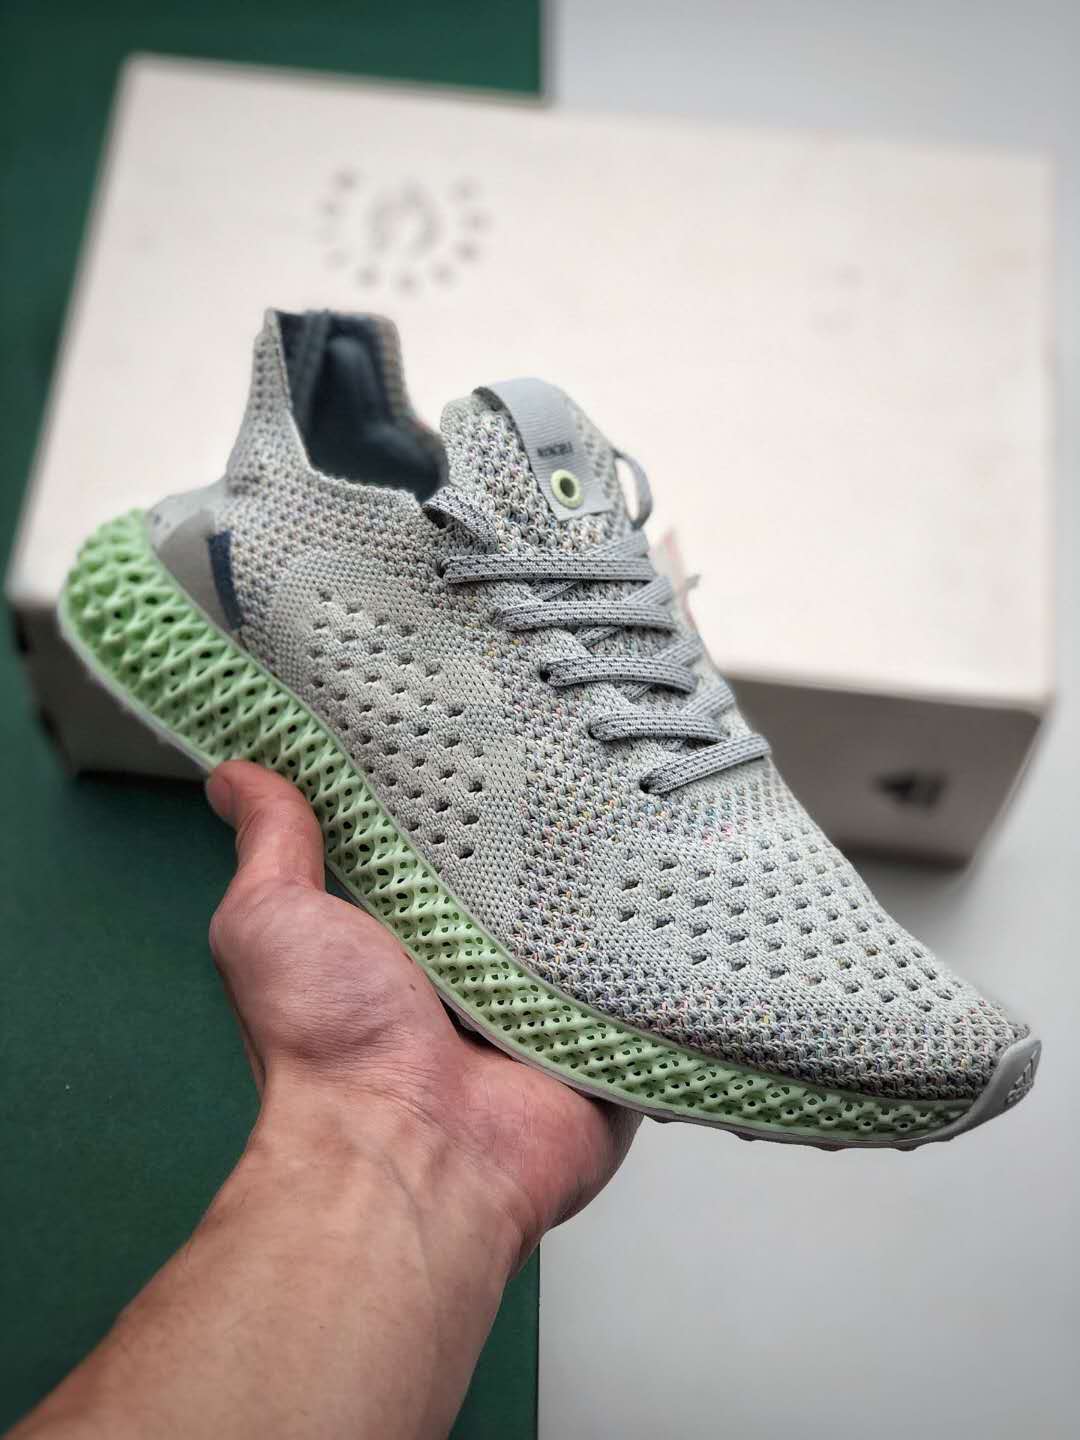 Adidas Futurecraft 4D Invincible Prism B96613 - Cutting-Edge Design and Unmatched Performance